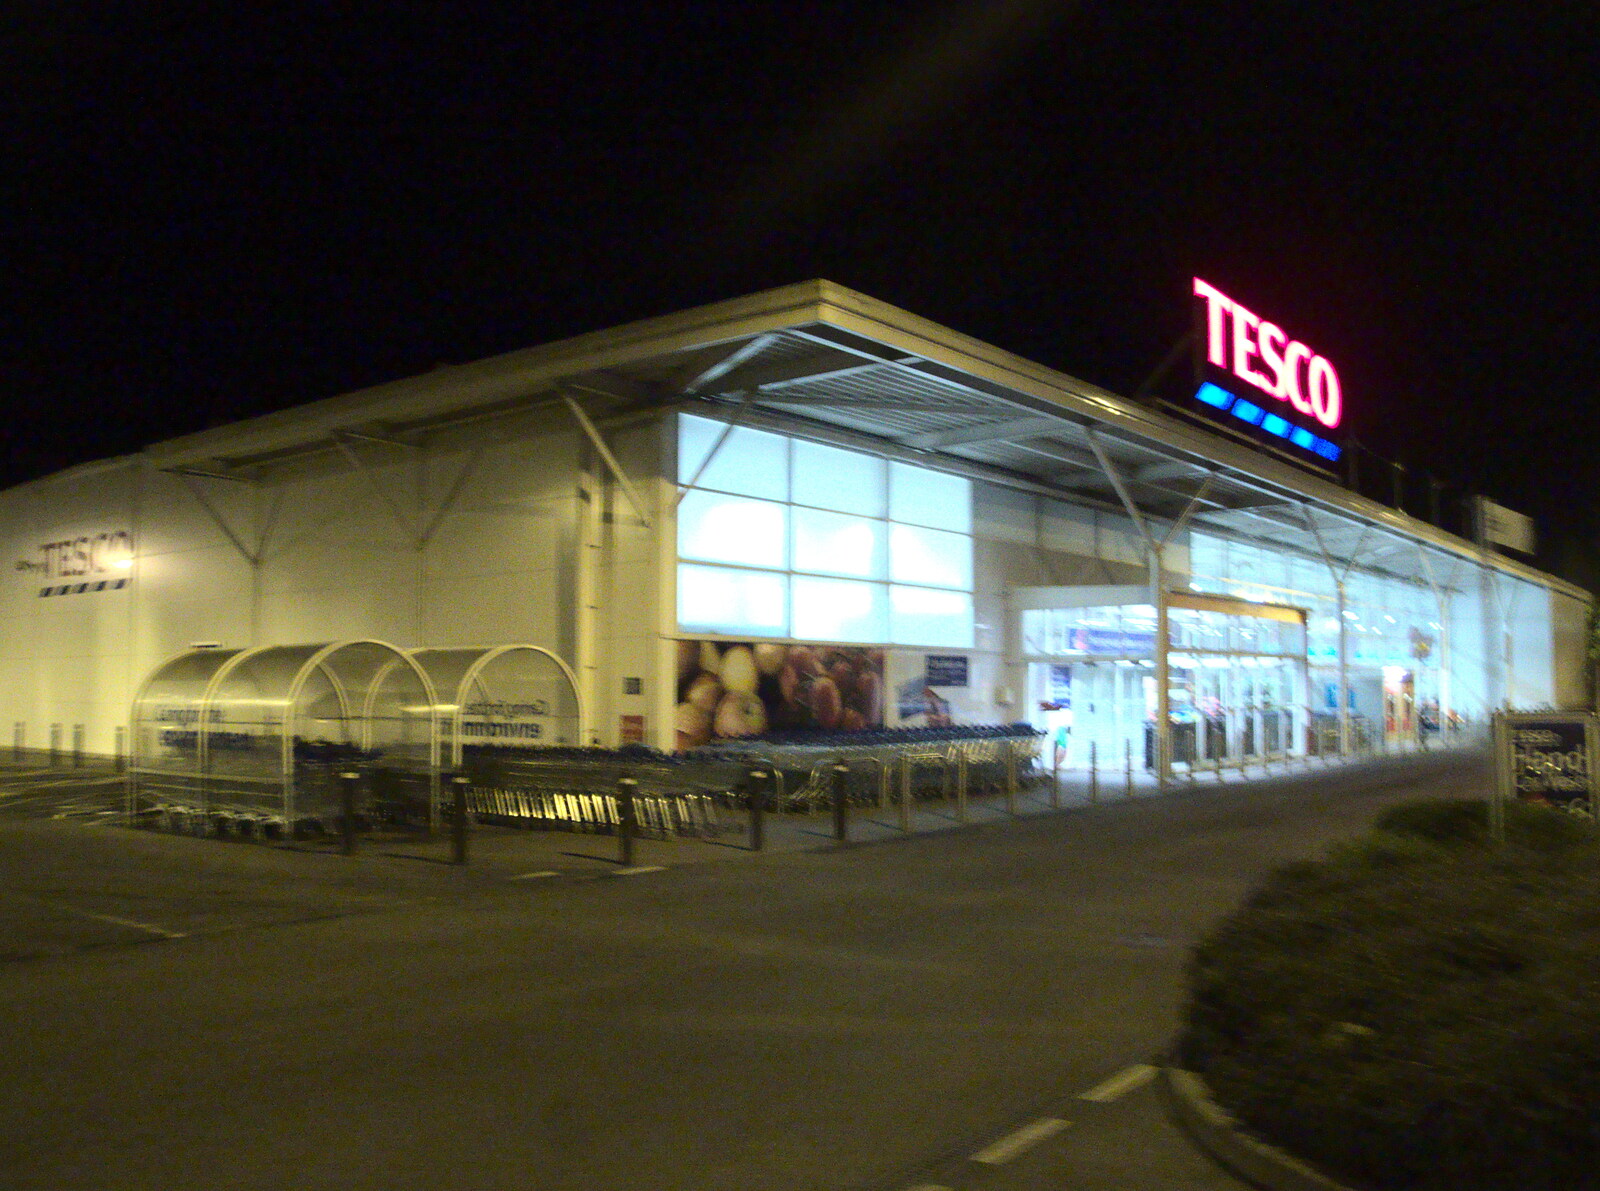 Tesco by night from Diss Kebabs and Pizza Express, Ipswich, Suffolk - 7th May 2015